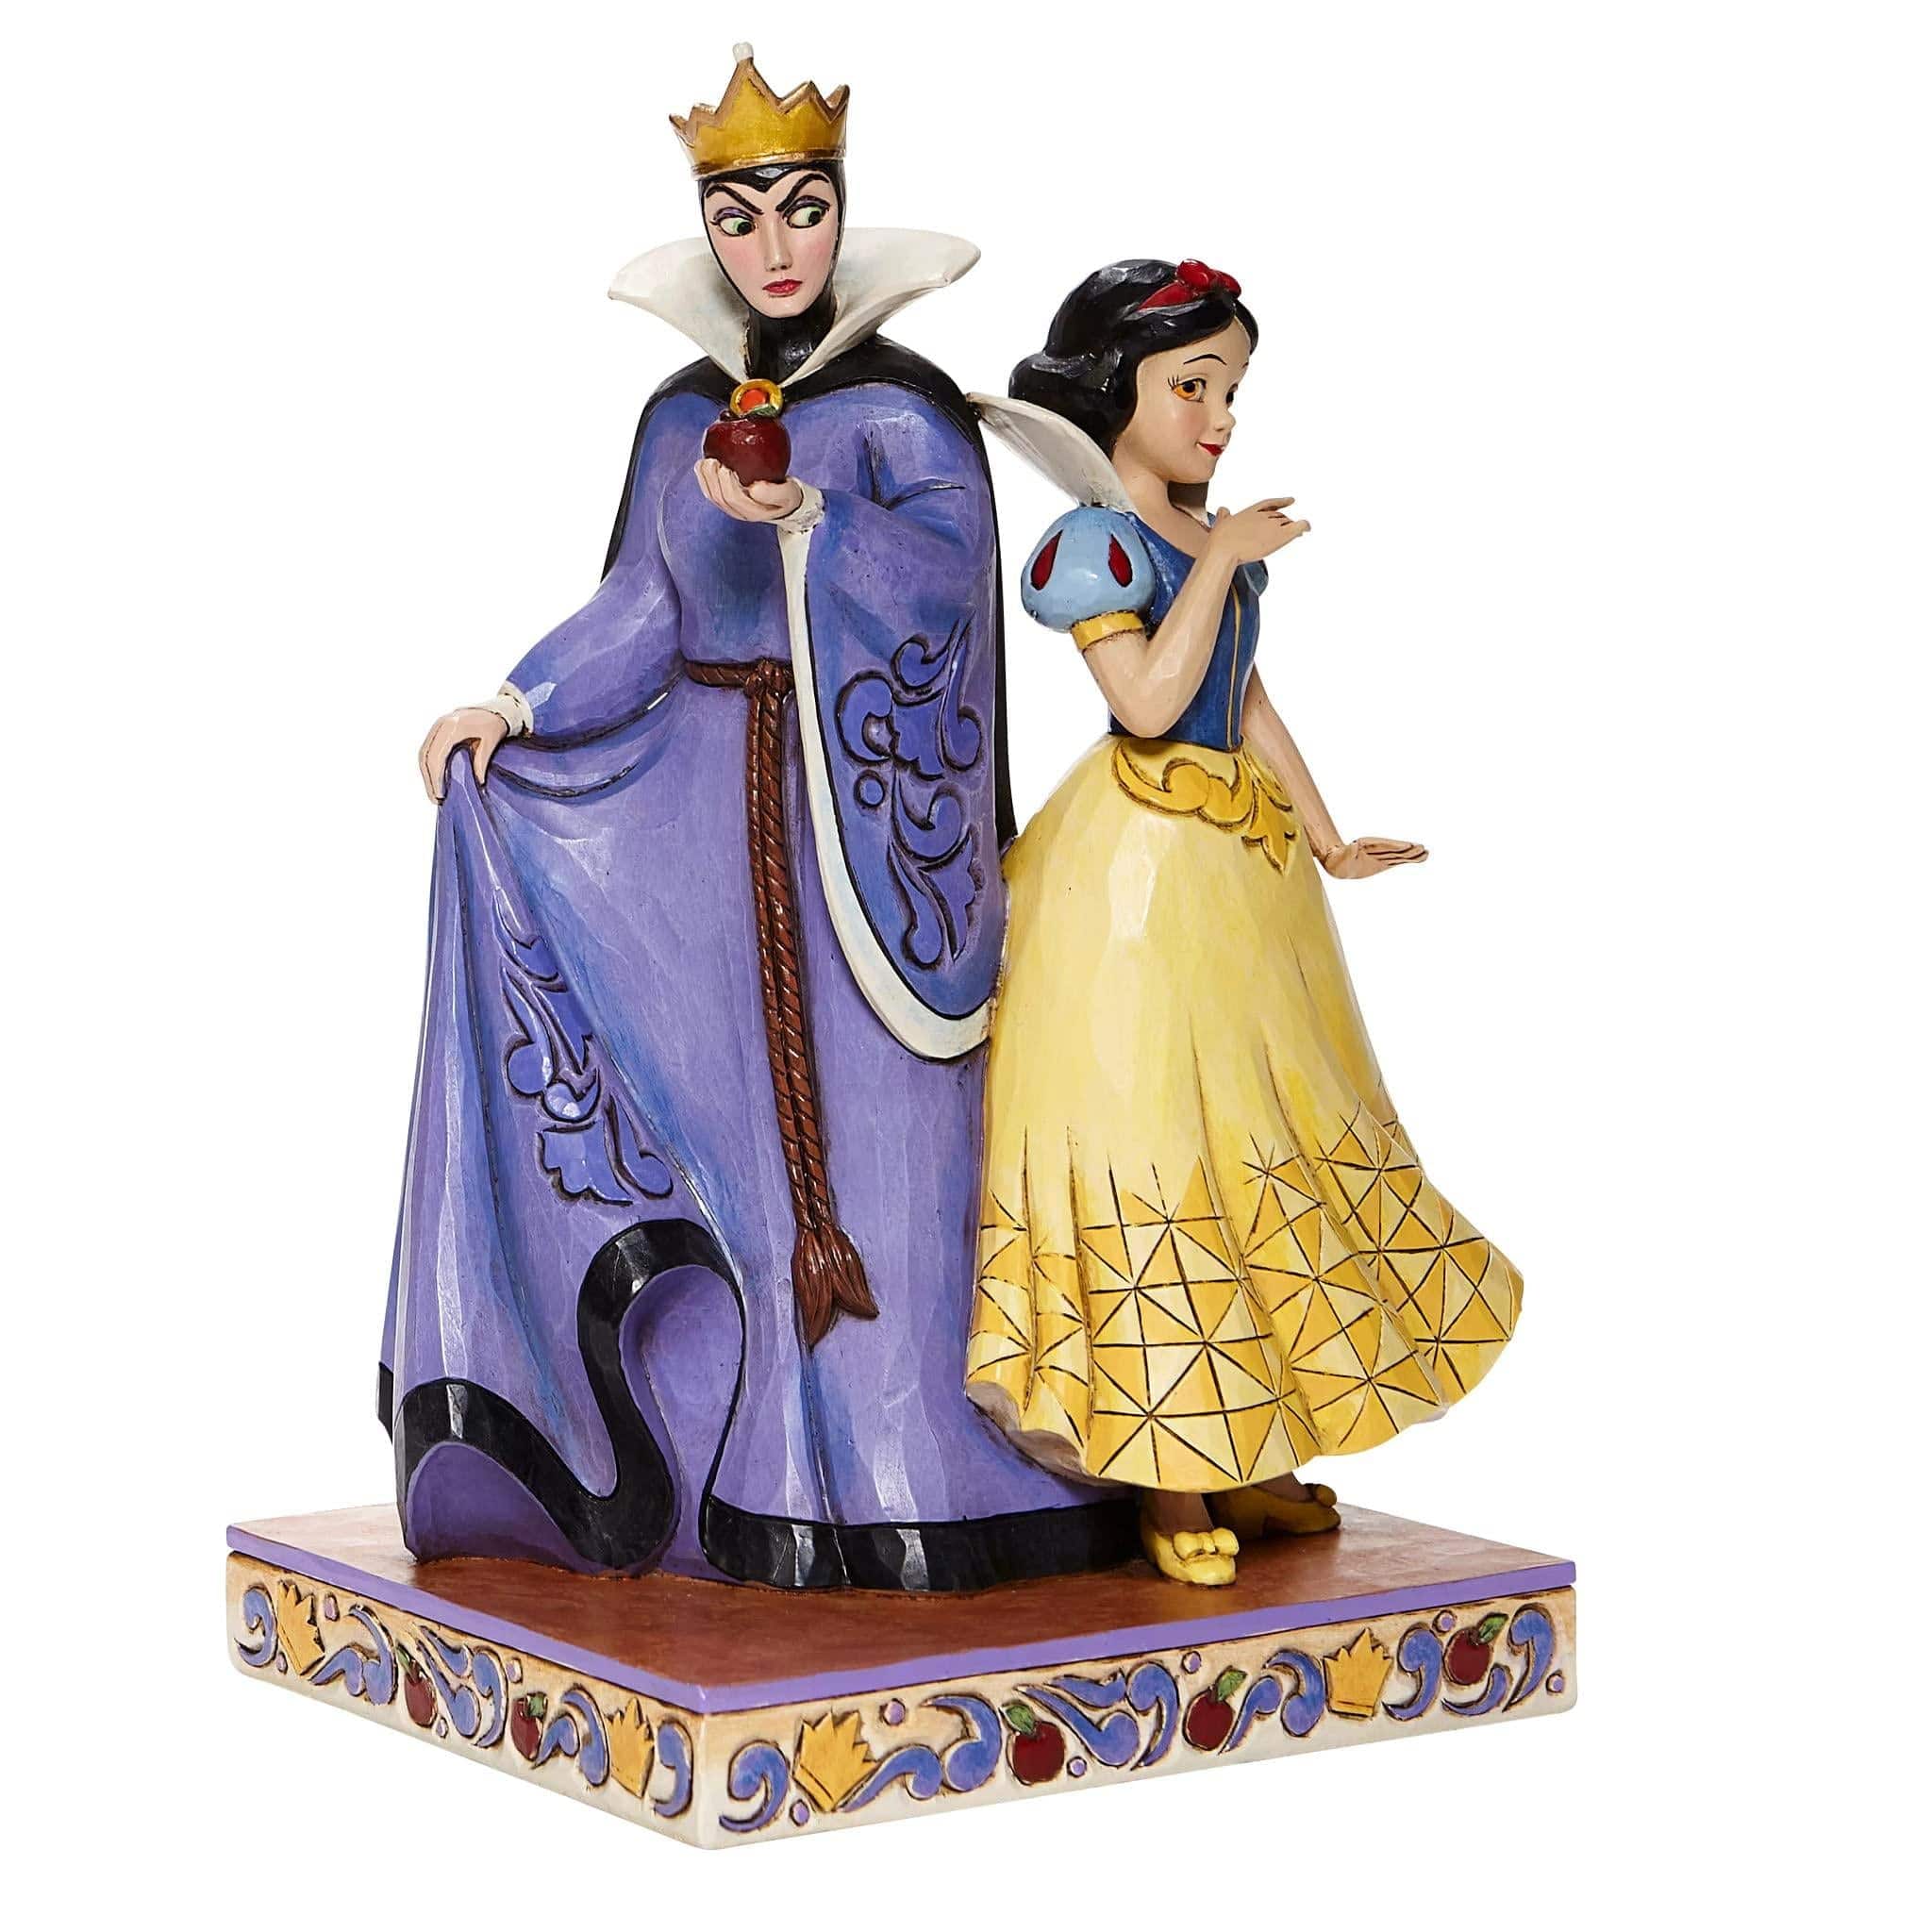 Enesco Disney Ornament Disney Traditions Figurine - Evil and Innocence - Snow White and Evil Queen